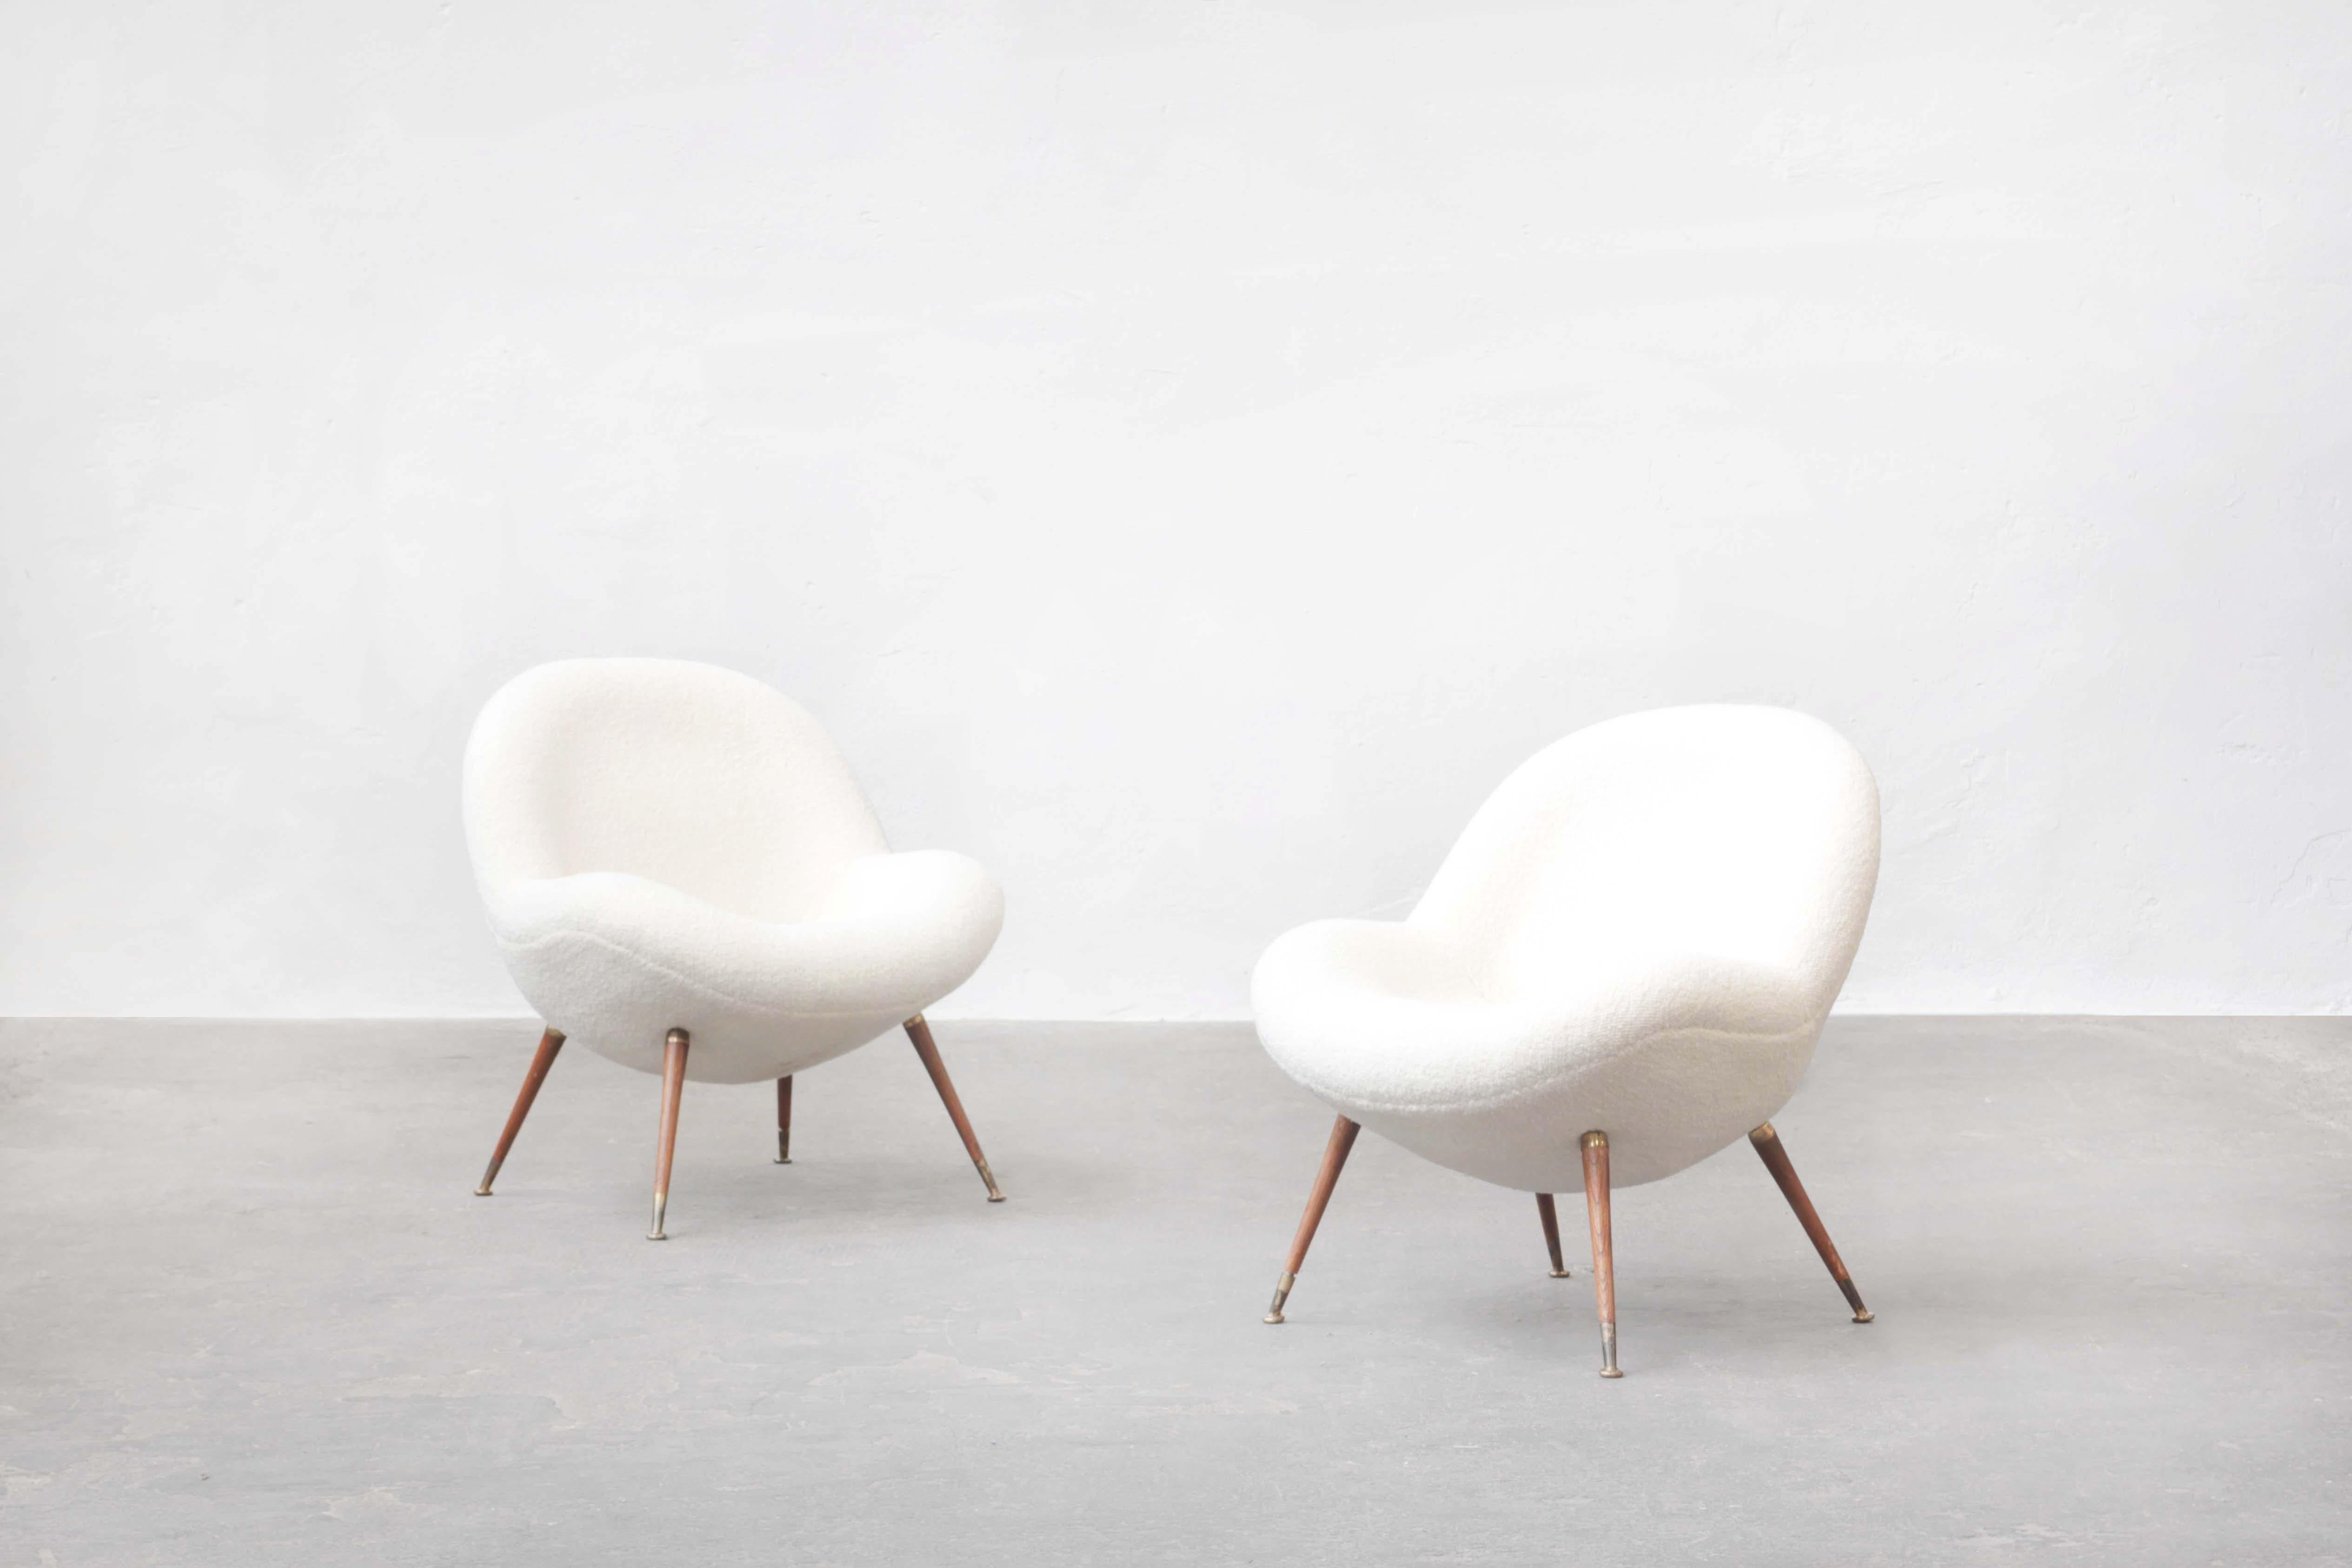 Lounge chair, new upholstery, white creme boucle by DEDAR, wooden legs with brass elements, designed by Fritz Neth and produced by Correcta in Germany, 1955.

A single lounge chair, designed by German Fritz Neth in the 1950s. Organically shaped